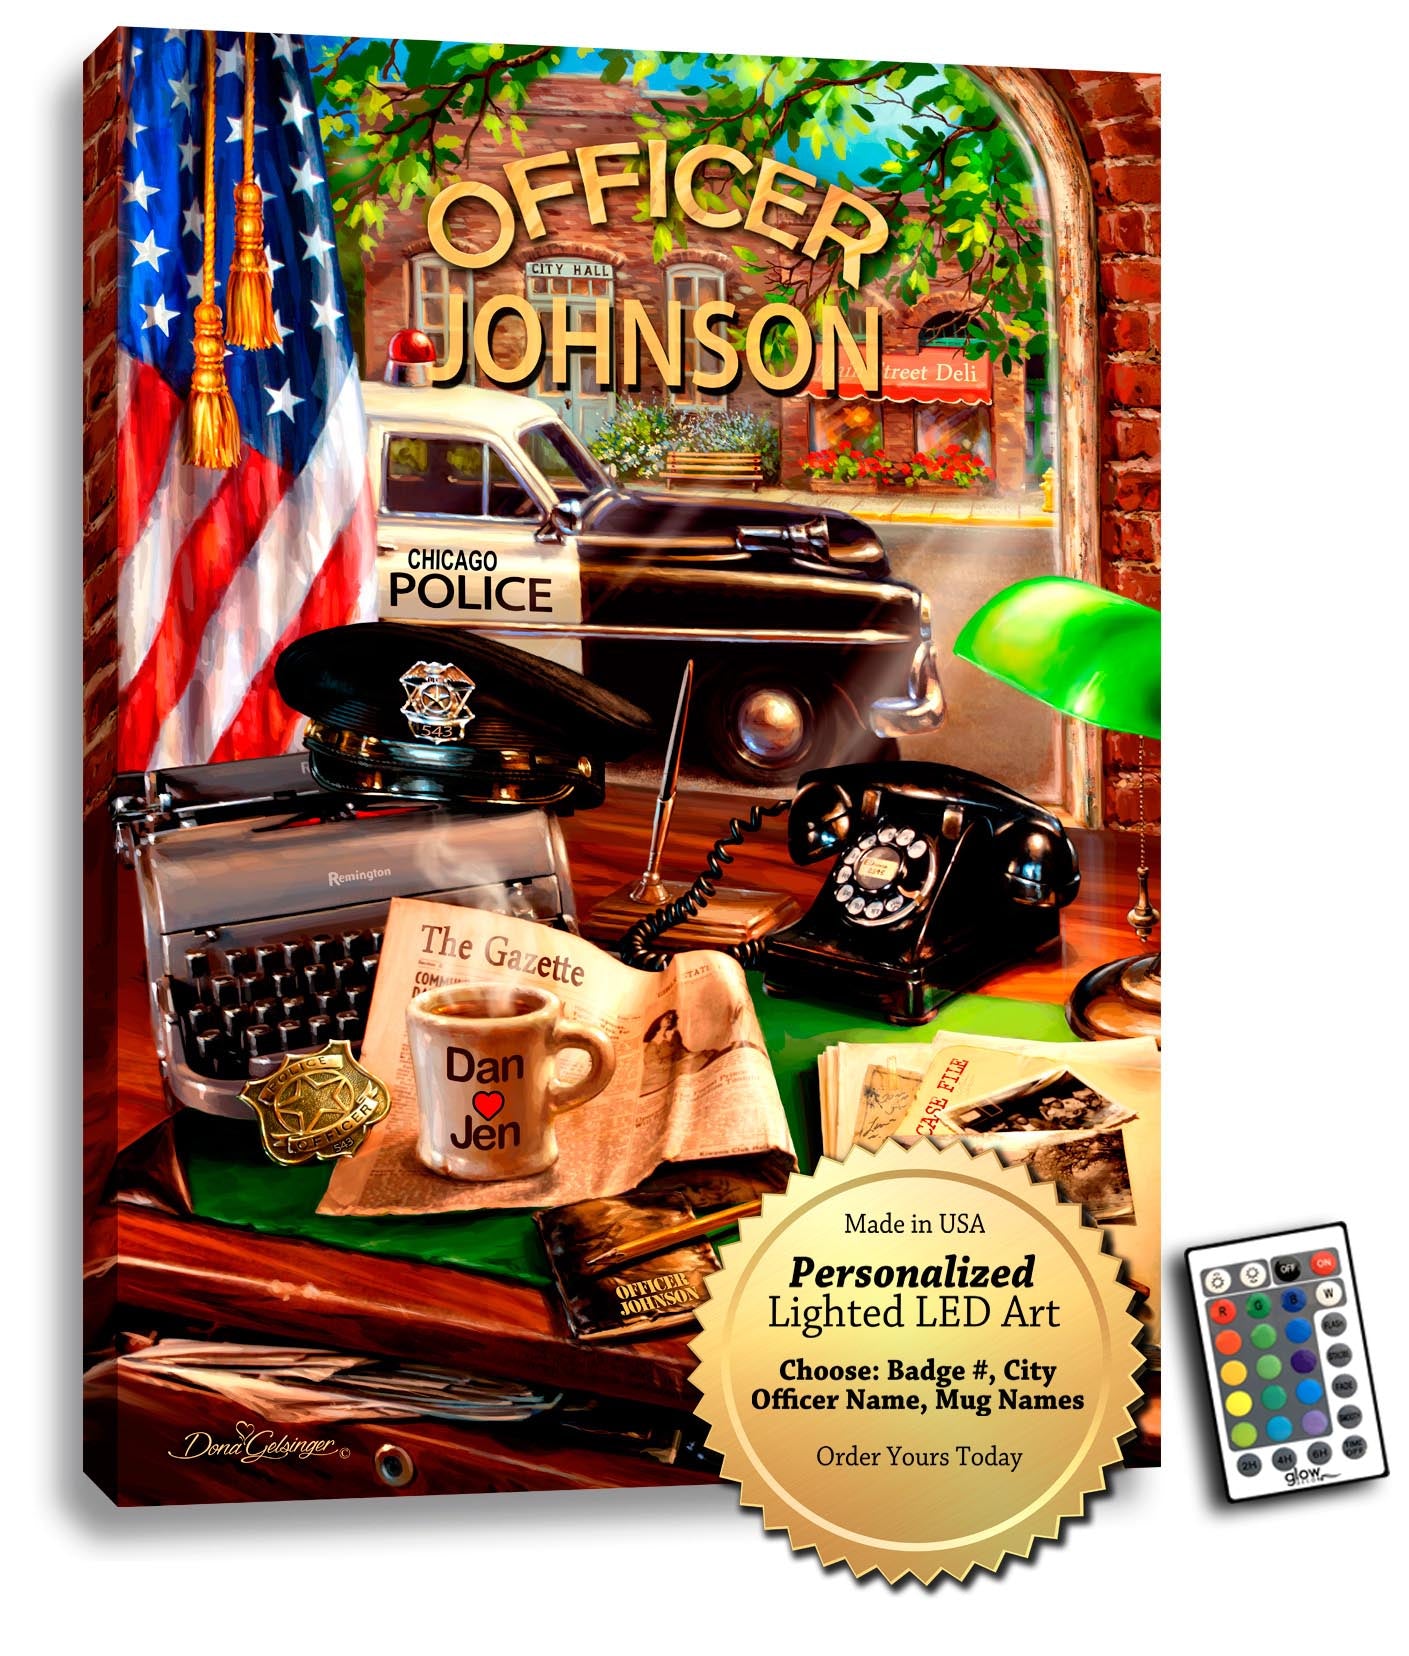 Featuring a stunning depiction of a police officer's desk, complete with all the essentials like a typewriter, phone, officers hat, badge, coffee cup, and case file, this piece is sure to impress. And with the ability to personalize the badge number, city, officers name, and name on the mugs, you can create a truly one-of-a-kind piece that they will treasure for years to come.